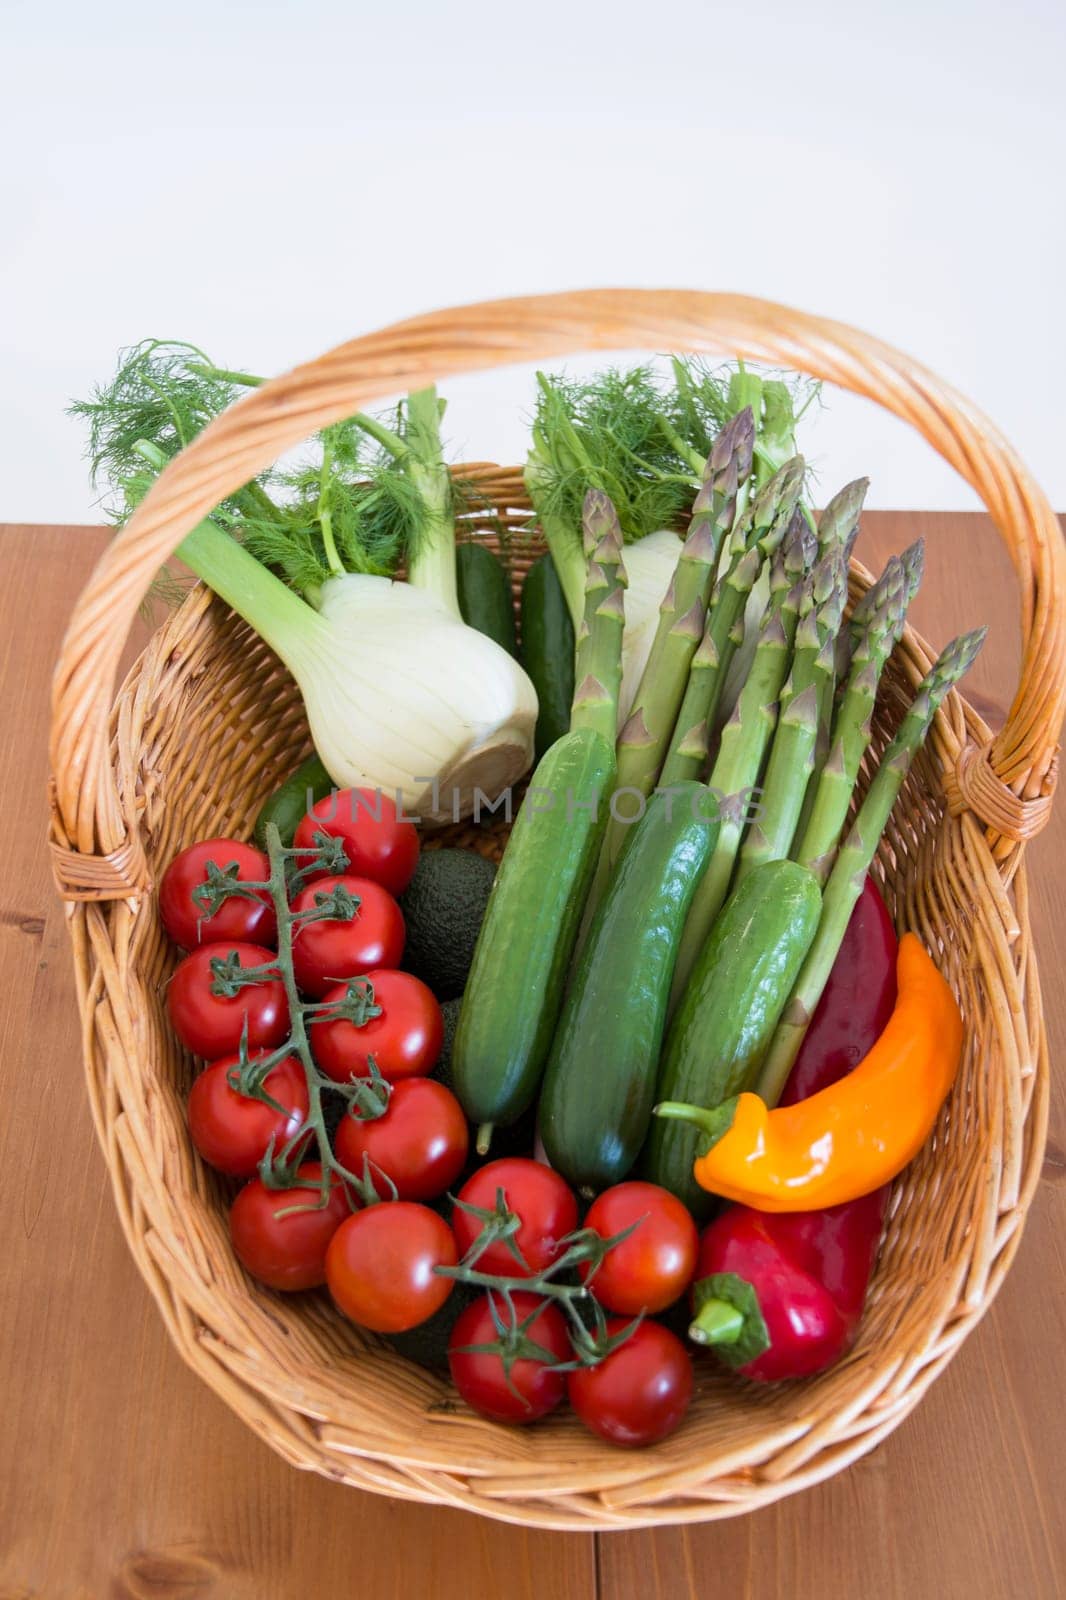 fresh assorted Vegetables in a basket on a wooden table, consumer vegetarian basket, tomatoes, fennel, paprika, asparagus,, cucumbers, avocado, Healthy eating concept, top view, High quality photo